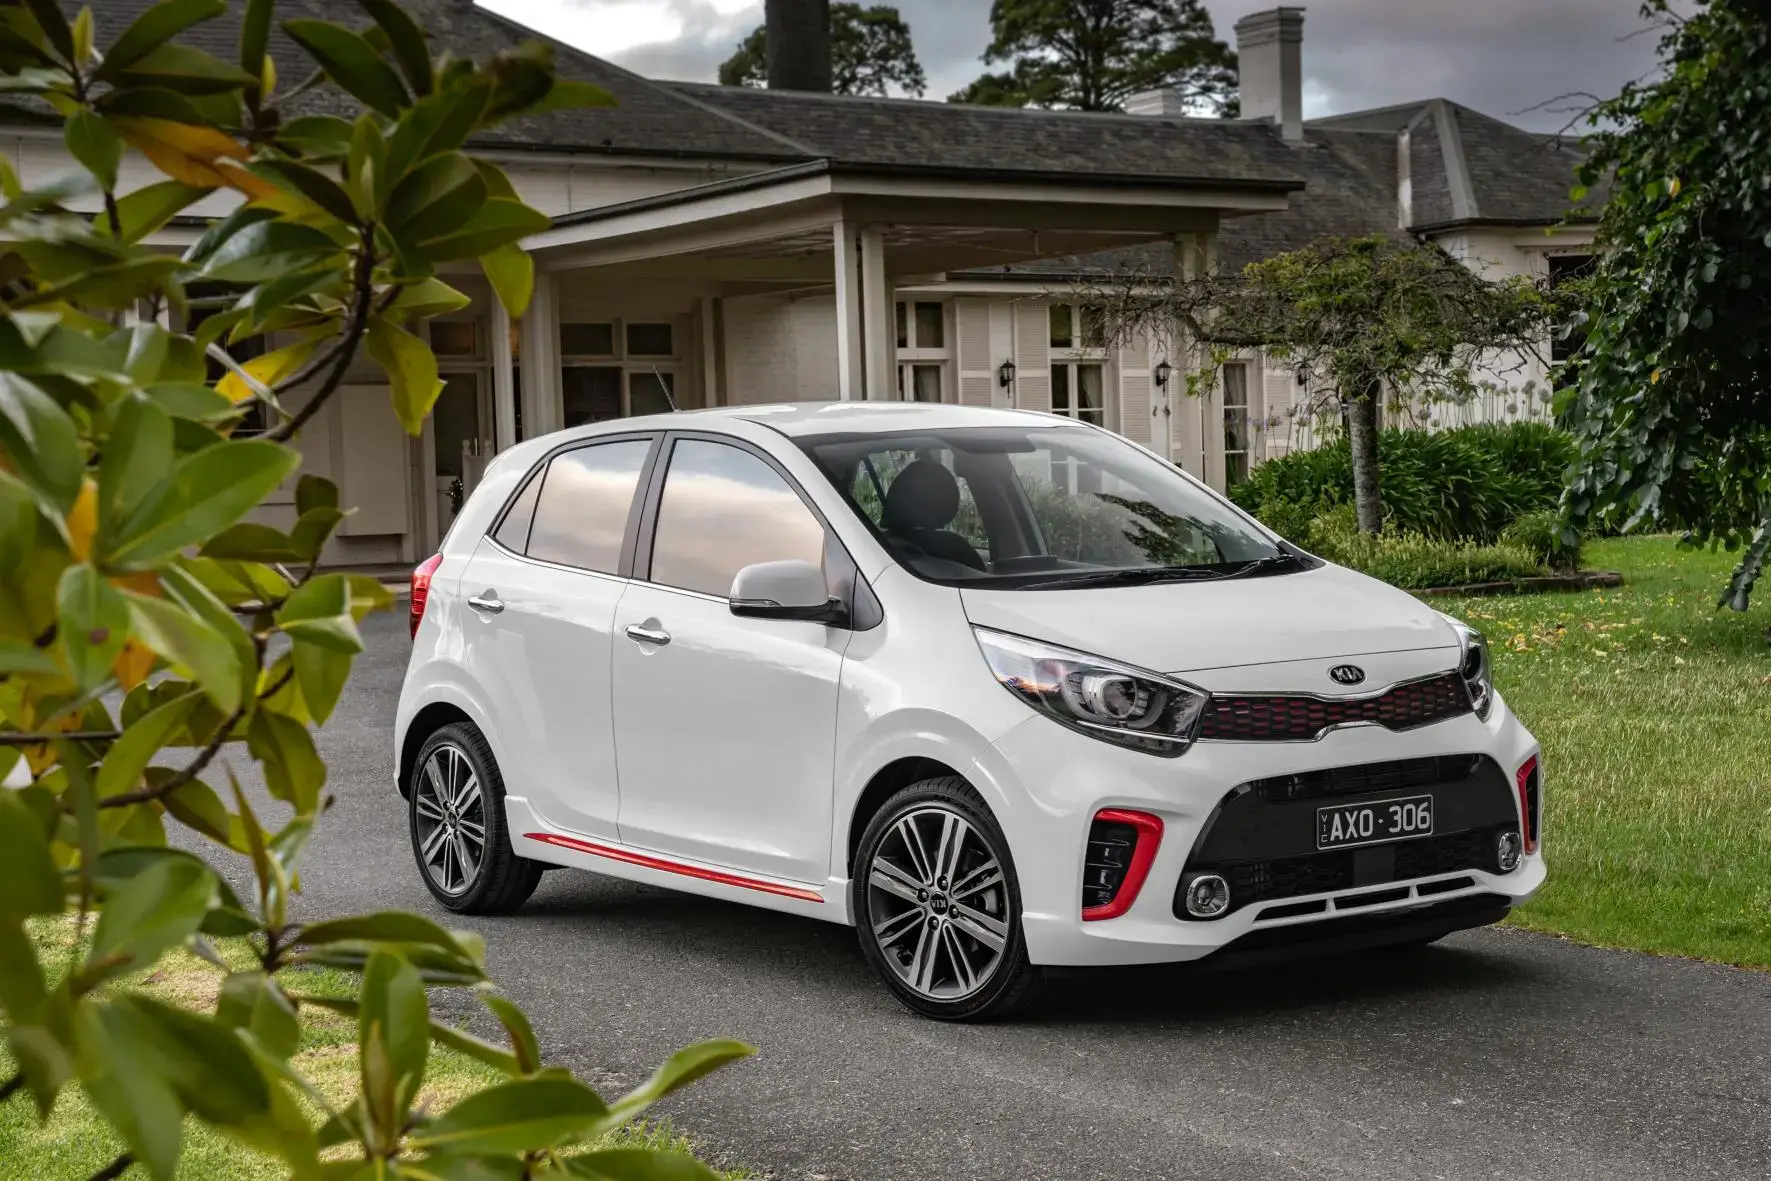 The top 5 small cars in Australia